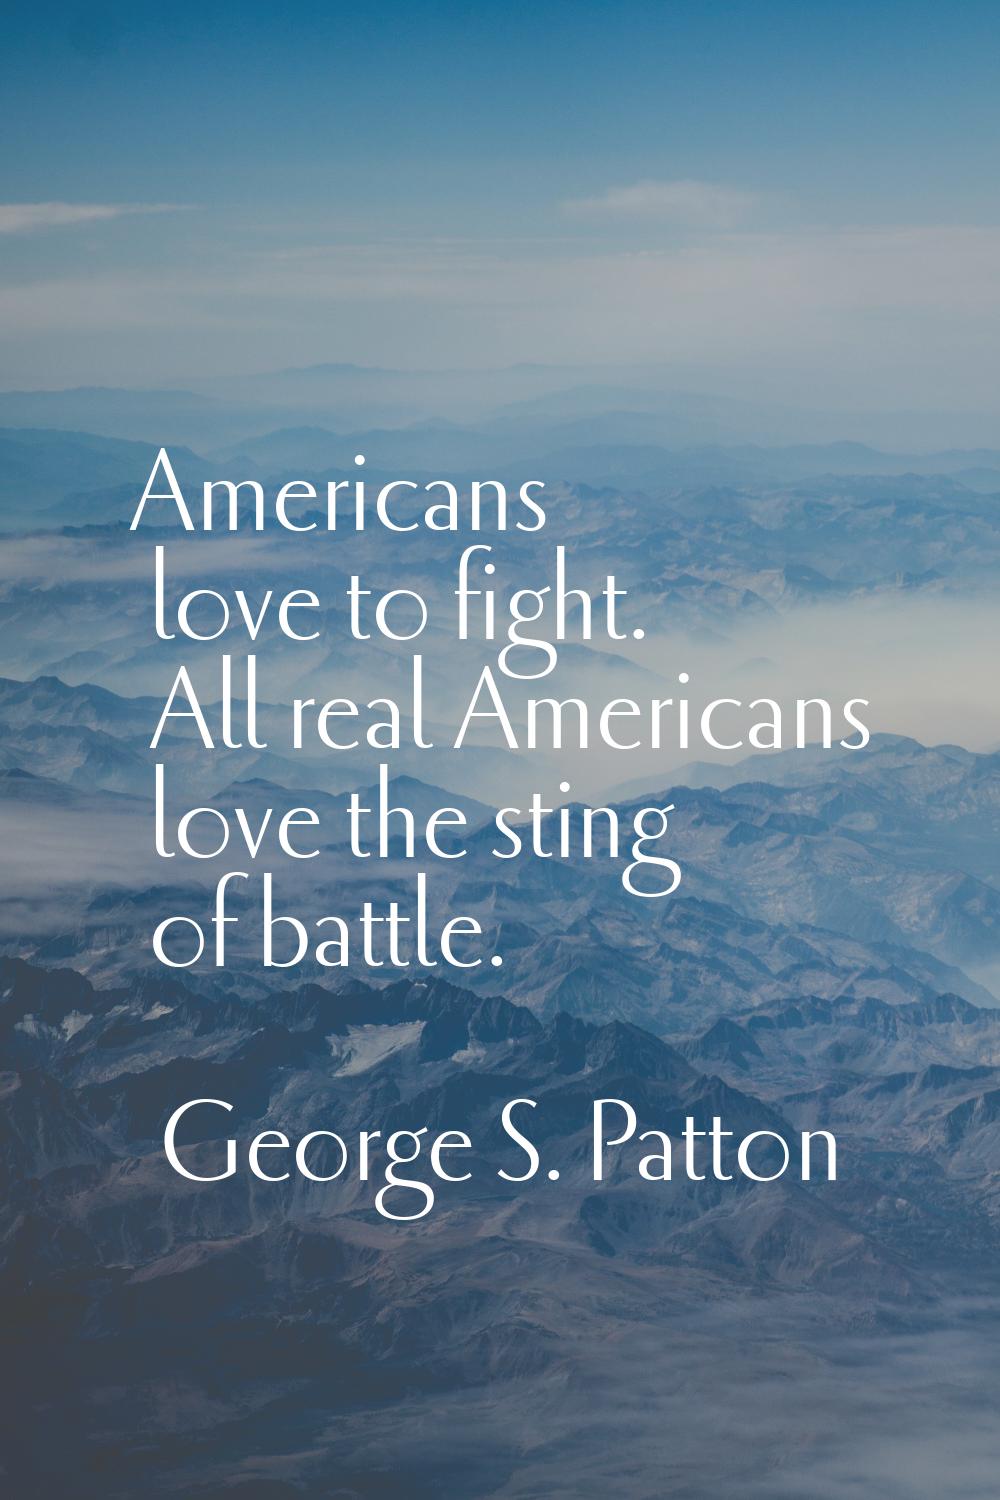 Americans love to fight. All real Americans love the sting of battle.